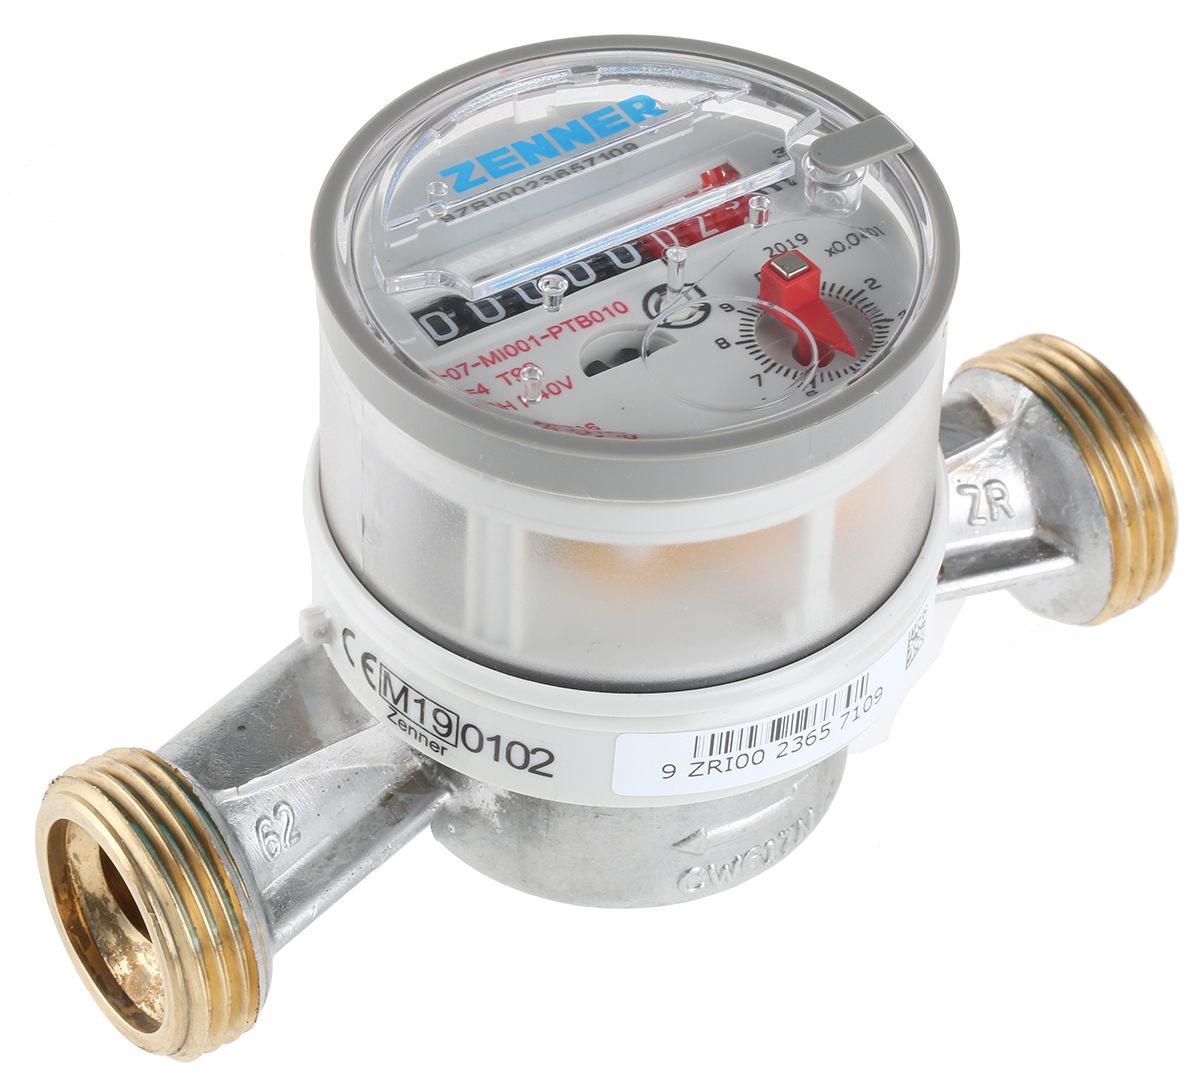 Reliance Class A 2.5m³/h Single-Jet Water Meter 3/4 in BSP Male